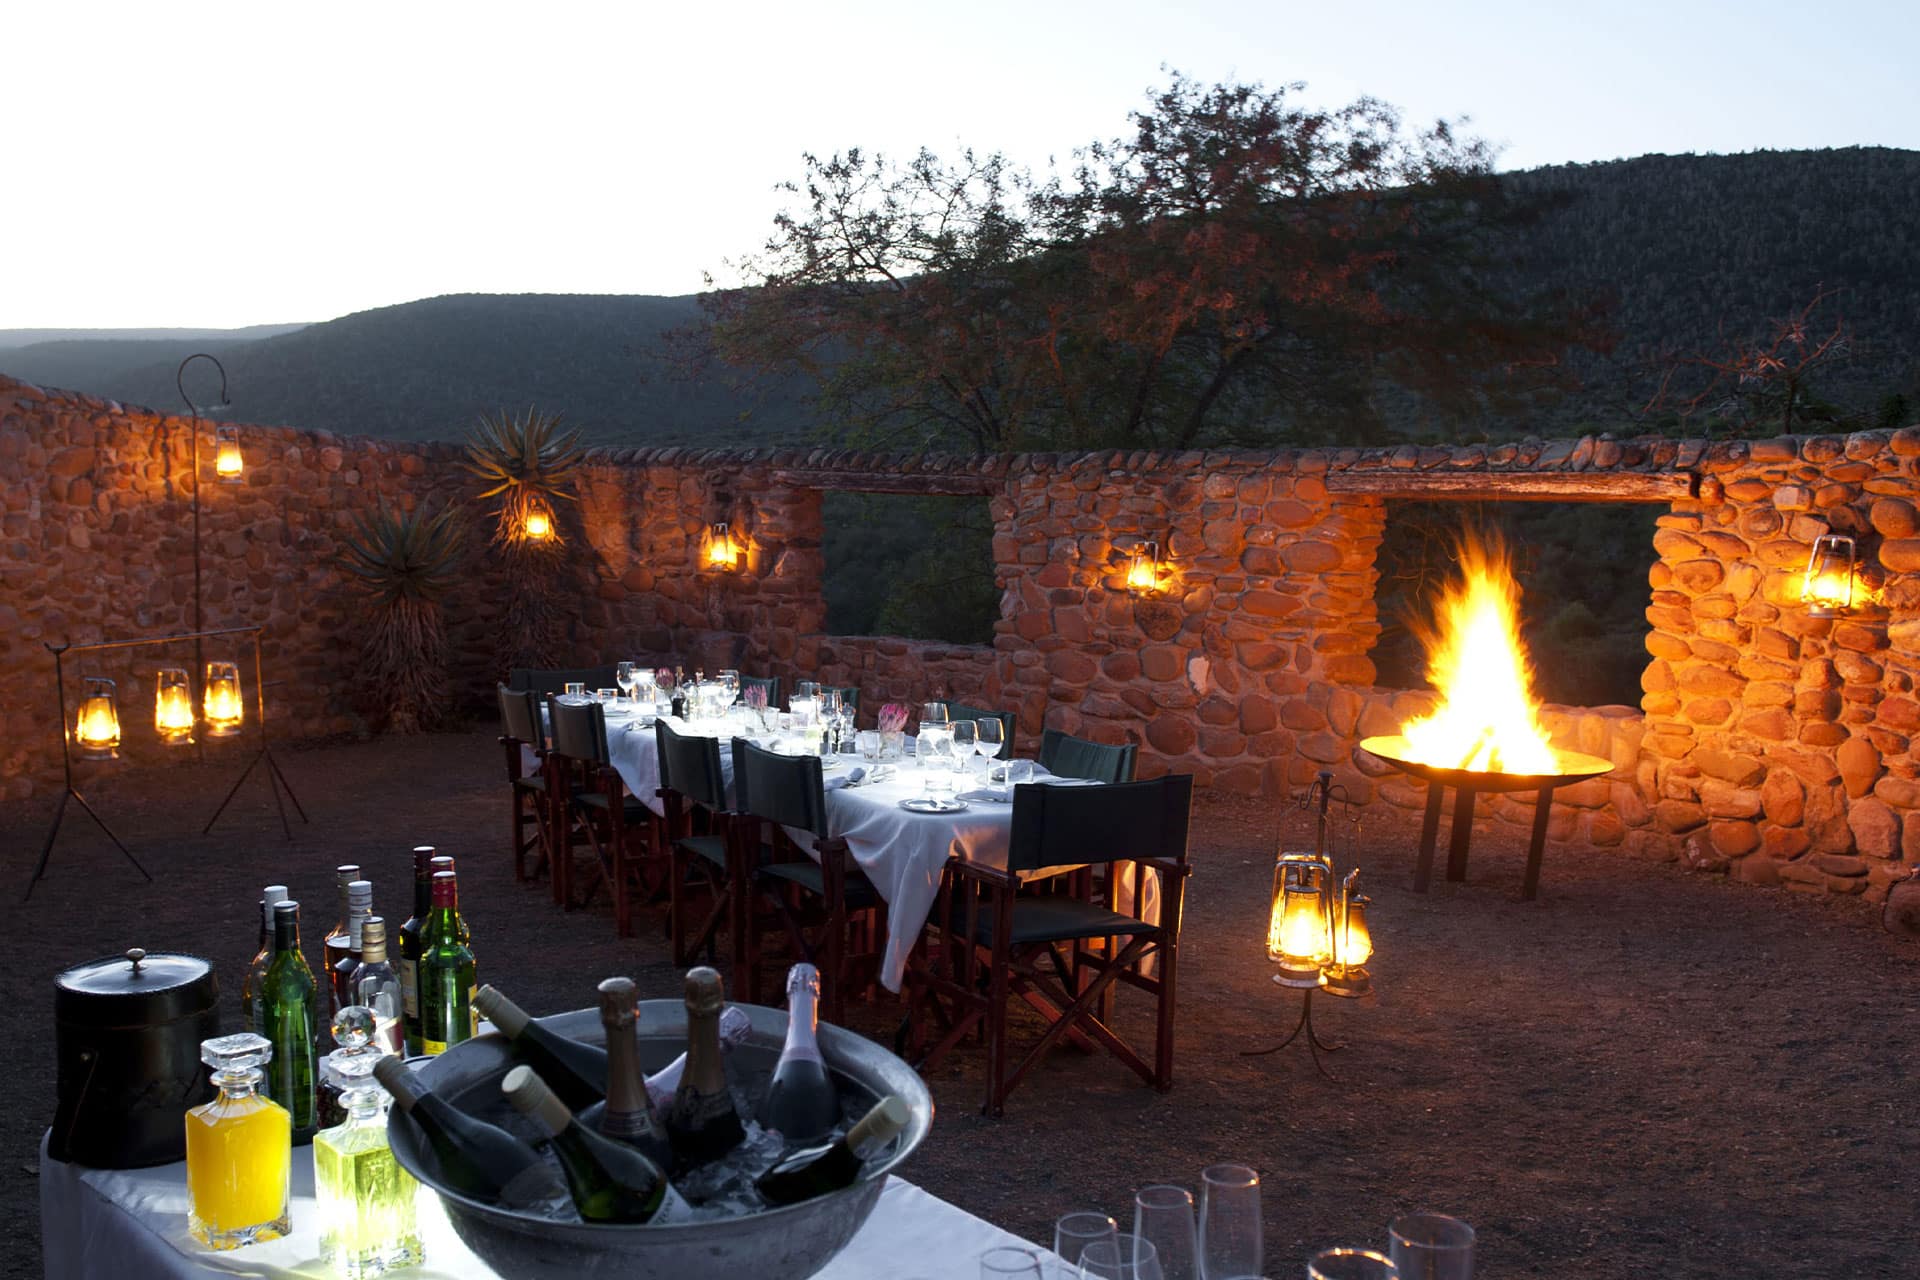 A set dinner table and drinks station in a boma with a lit campfire at Ecca Lodge at Kwandwe Private Game Reserve.